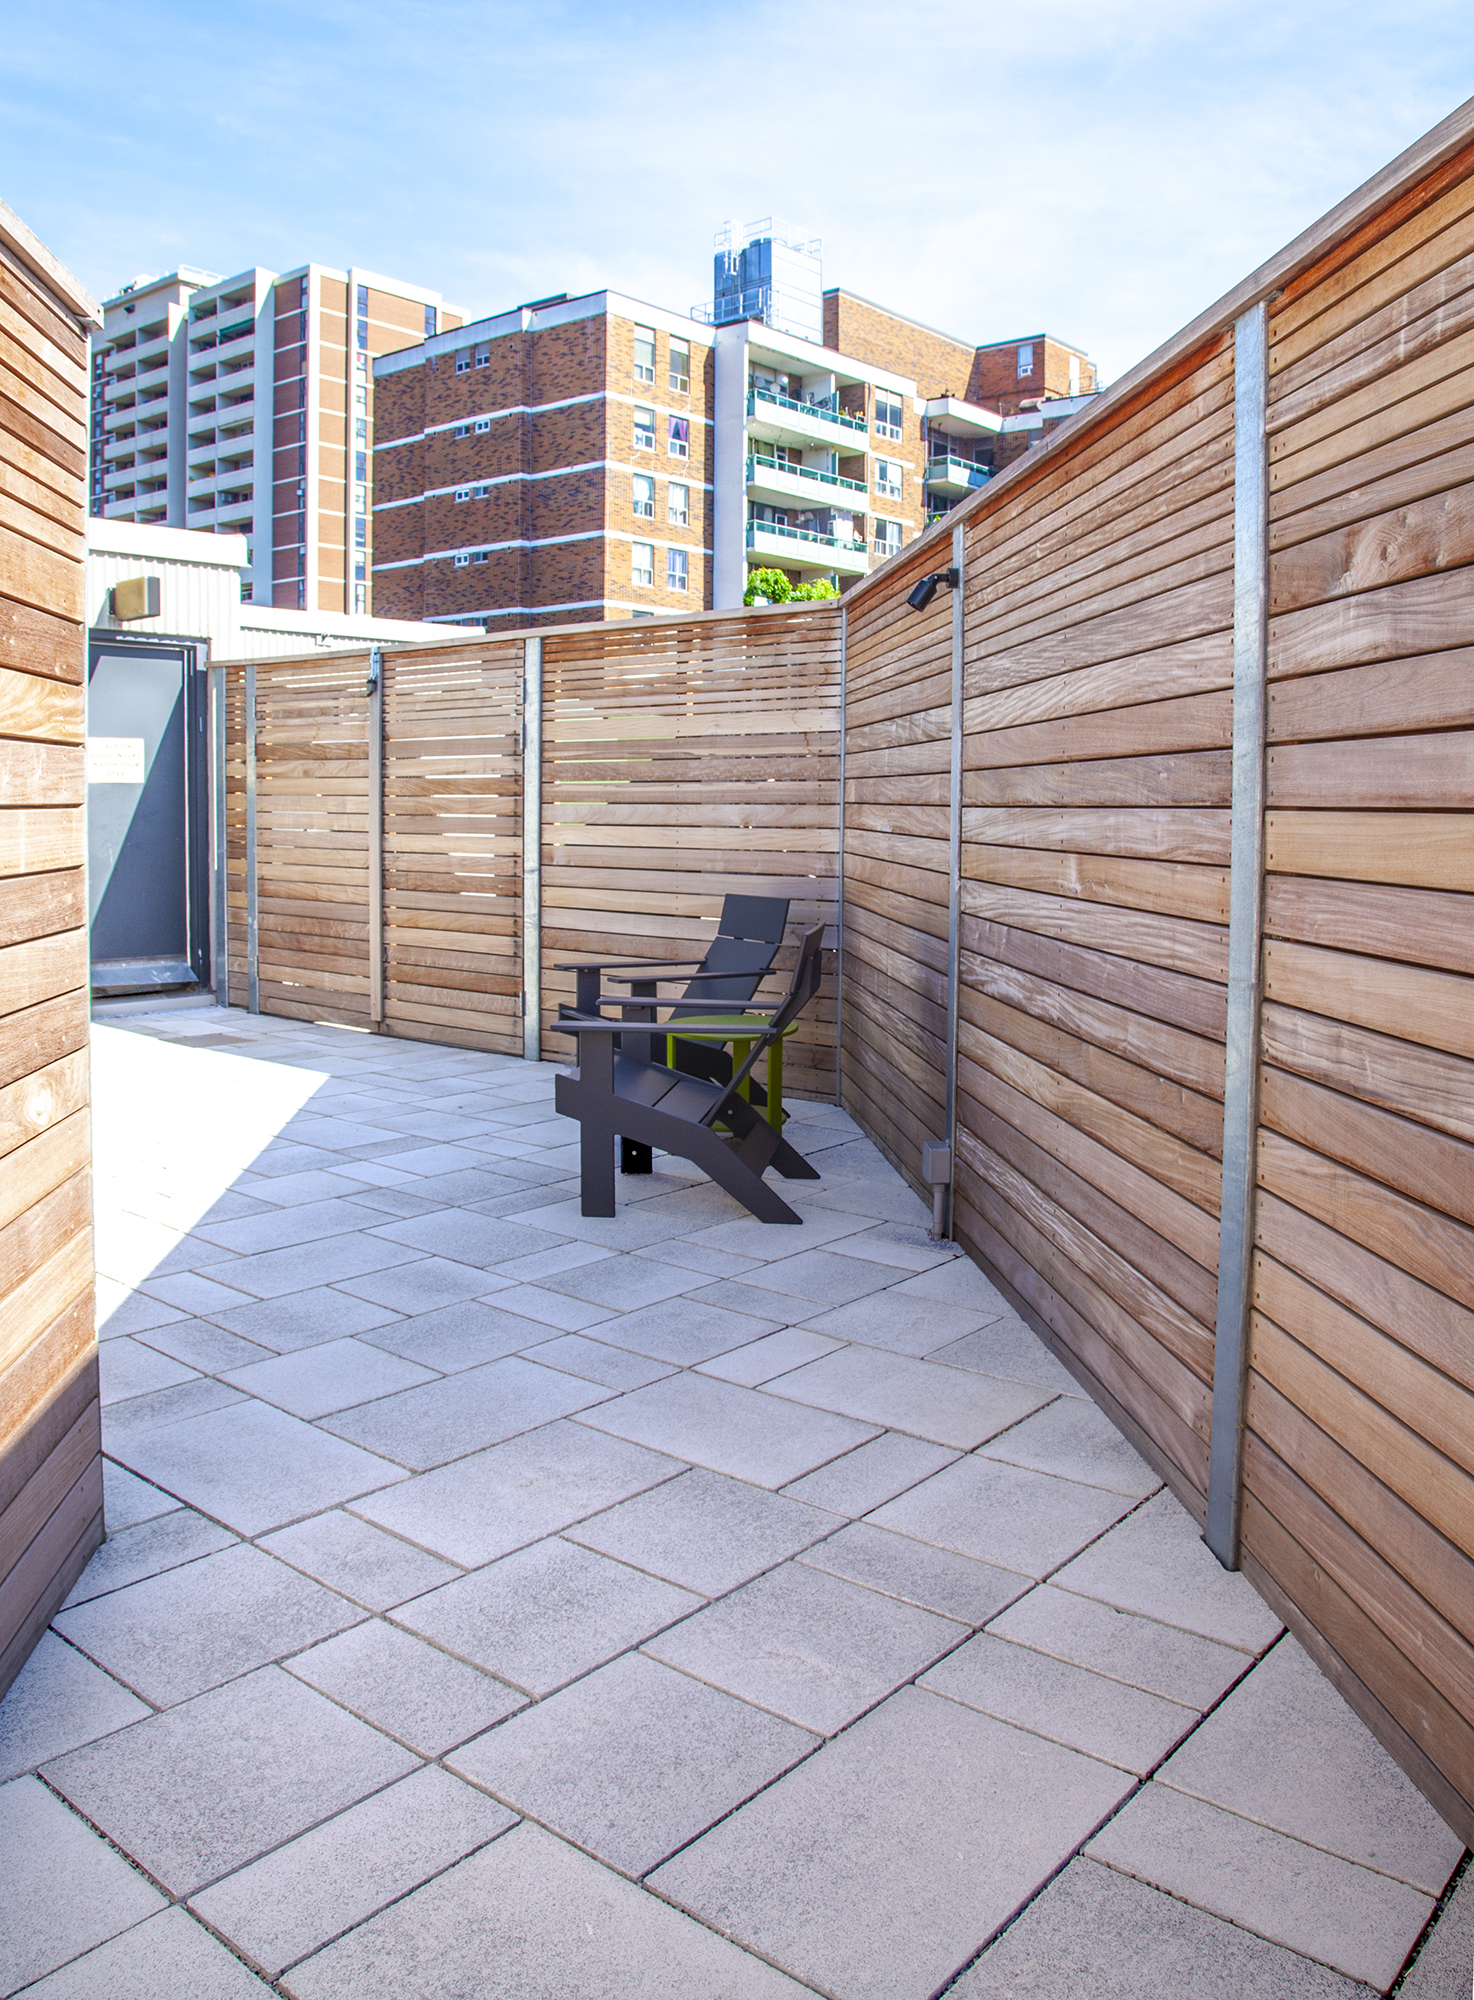 130 Carlton roof deck features Unilock Umbriano slabs in Winter Marvel, privacy walls, and outdoor amenities.